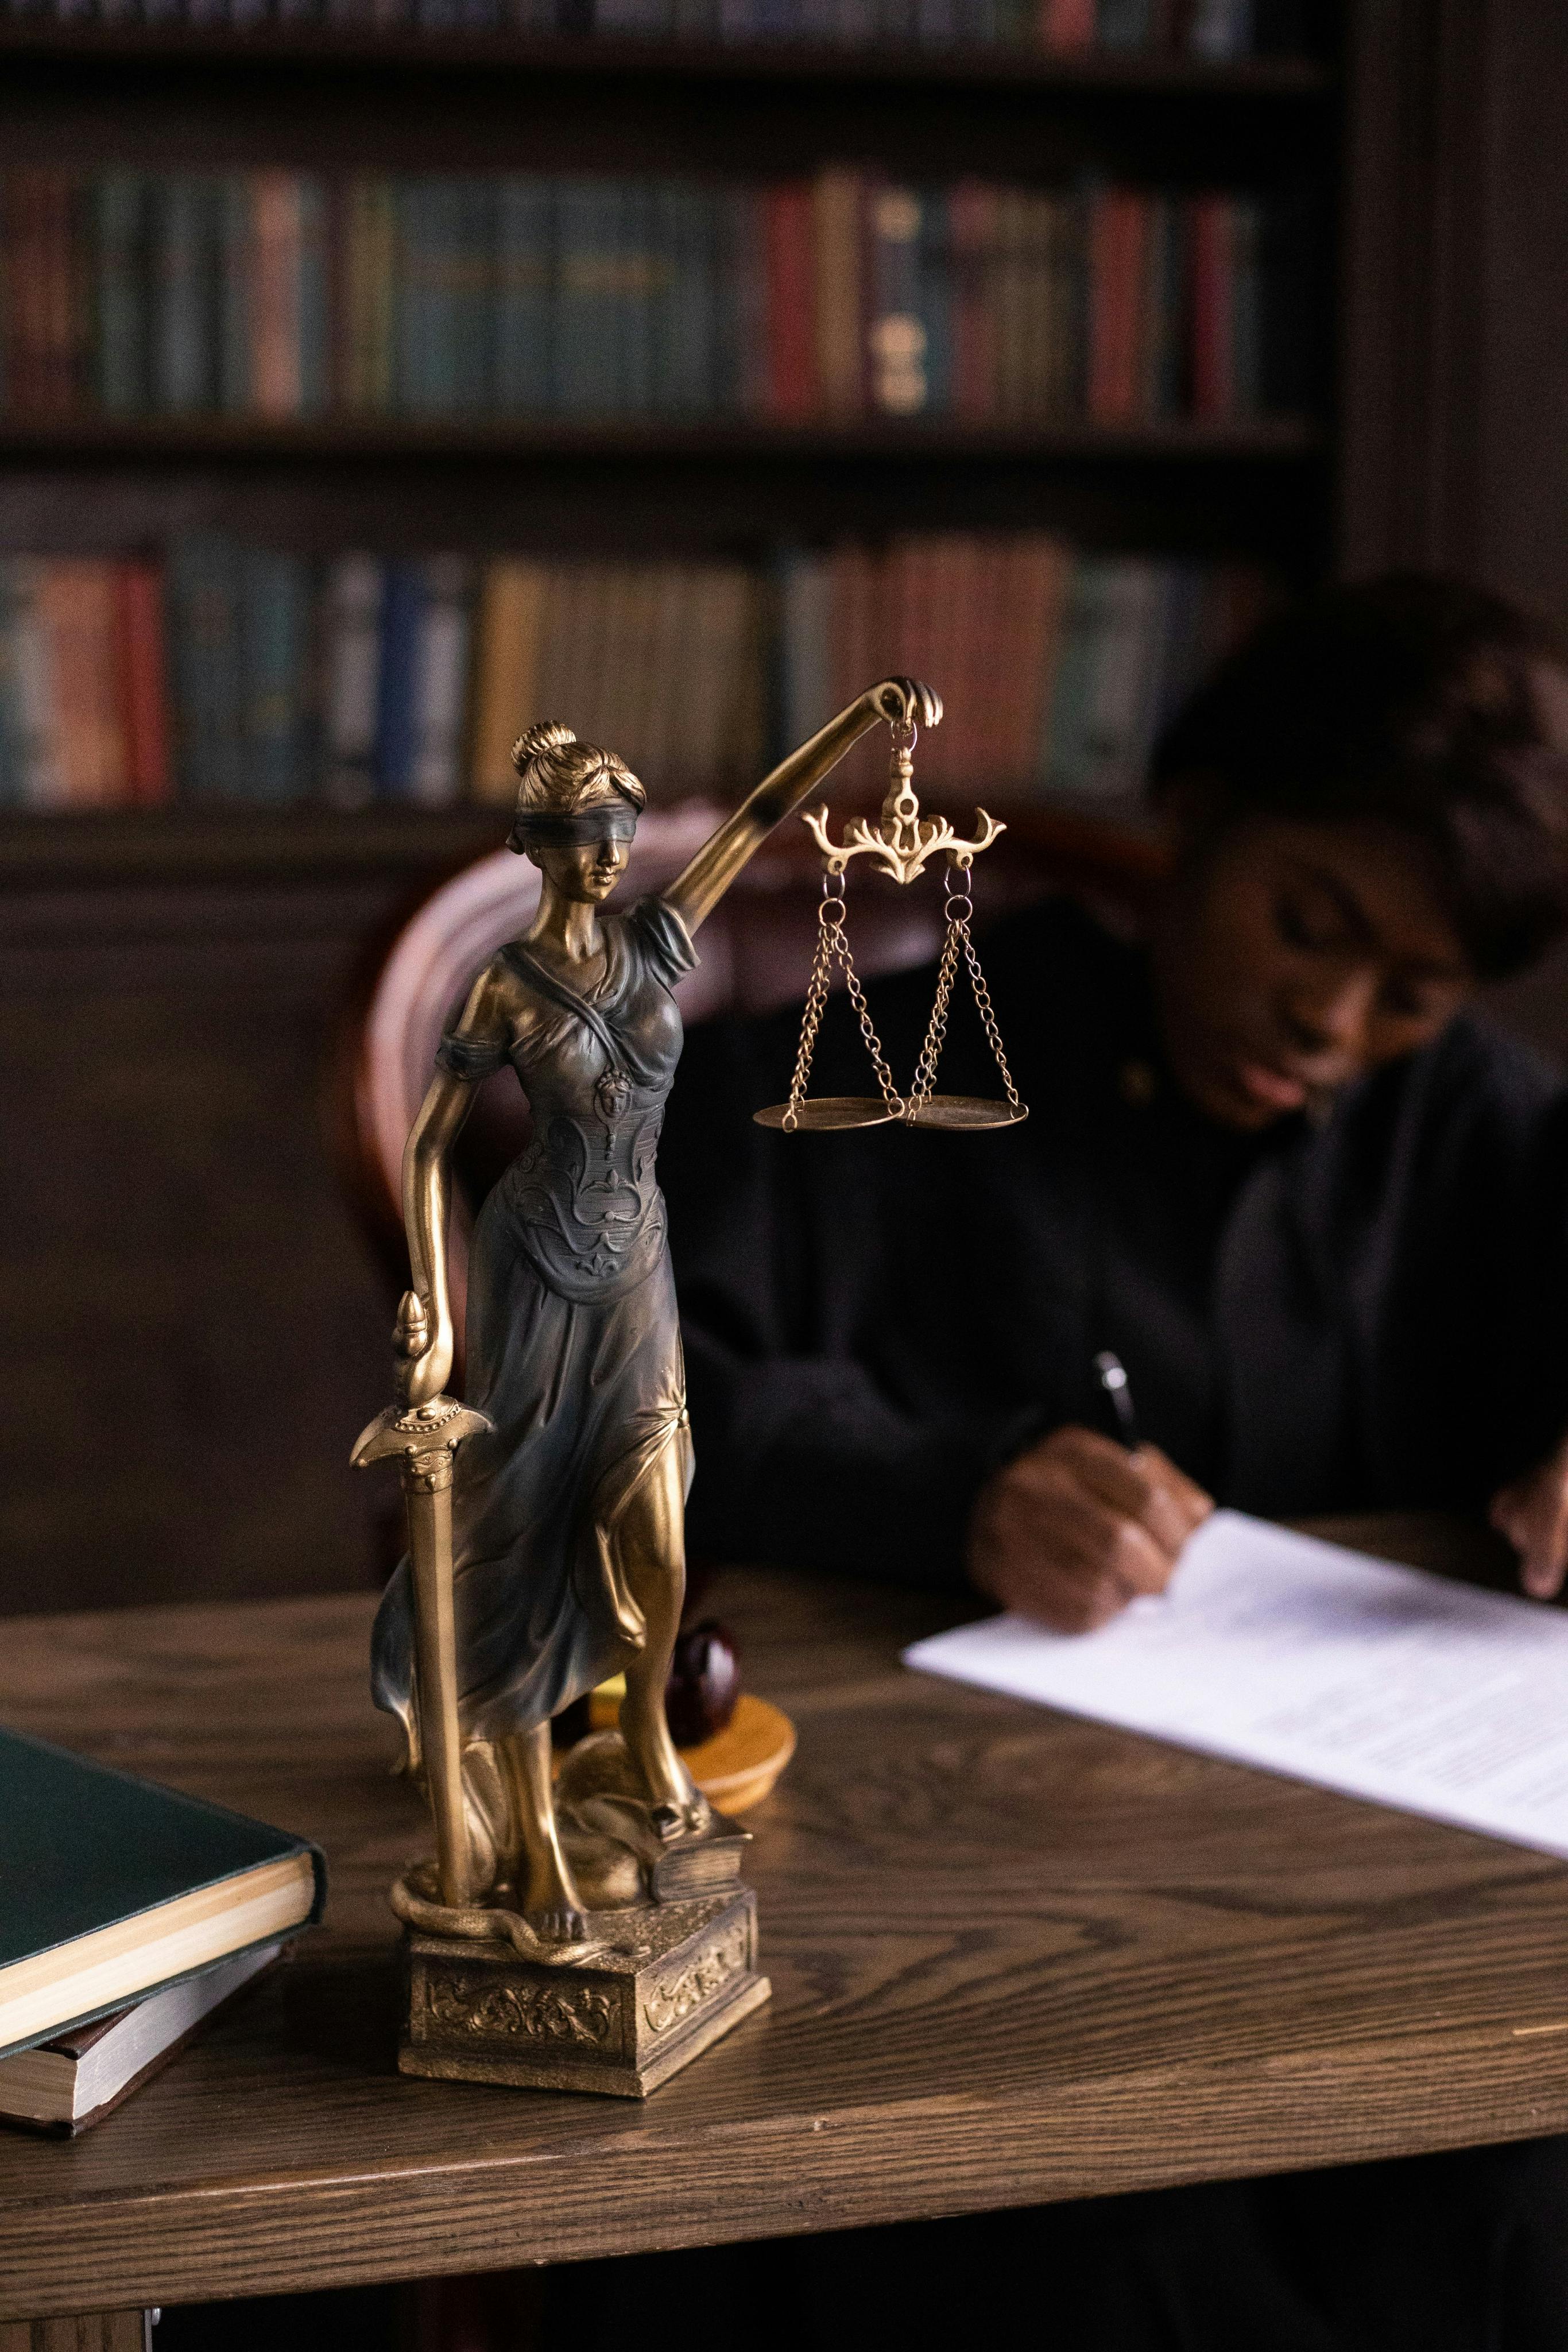 Scales of justice on lawyers desk